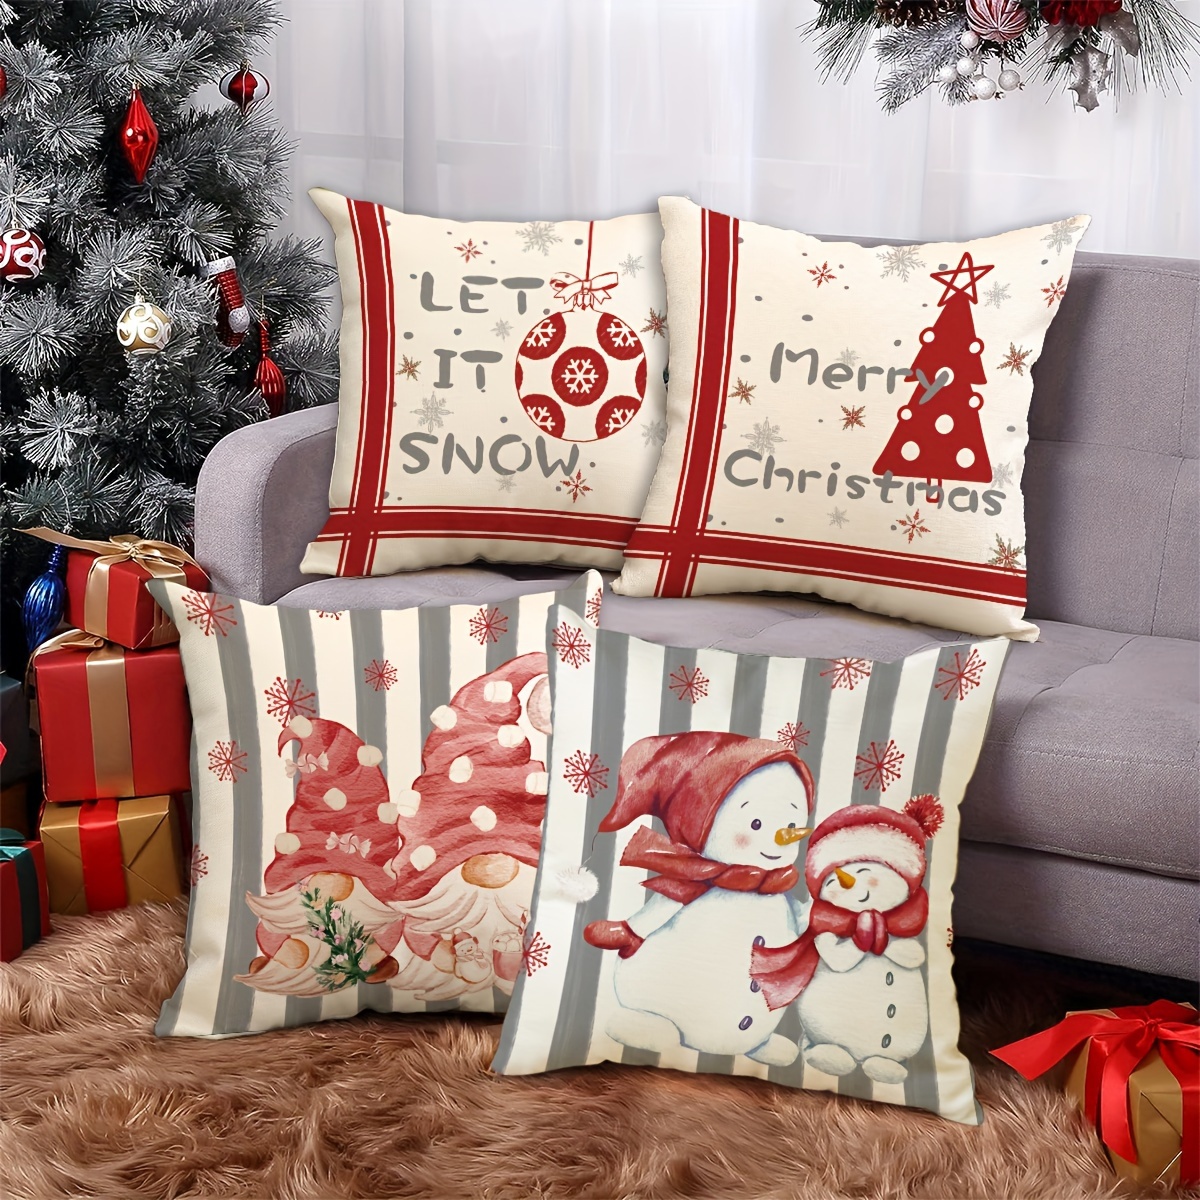 Christmas Snowman Landscaping Christmas Tree Bell Throw Pillow